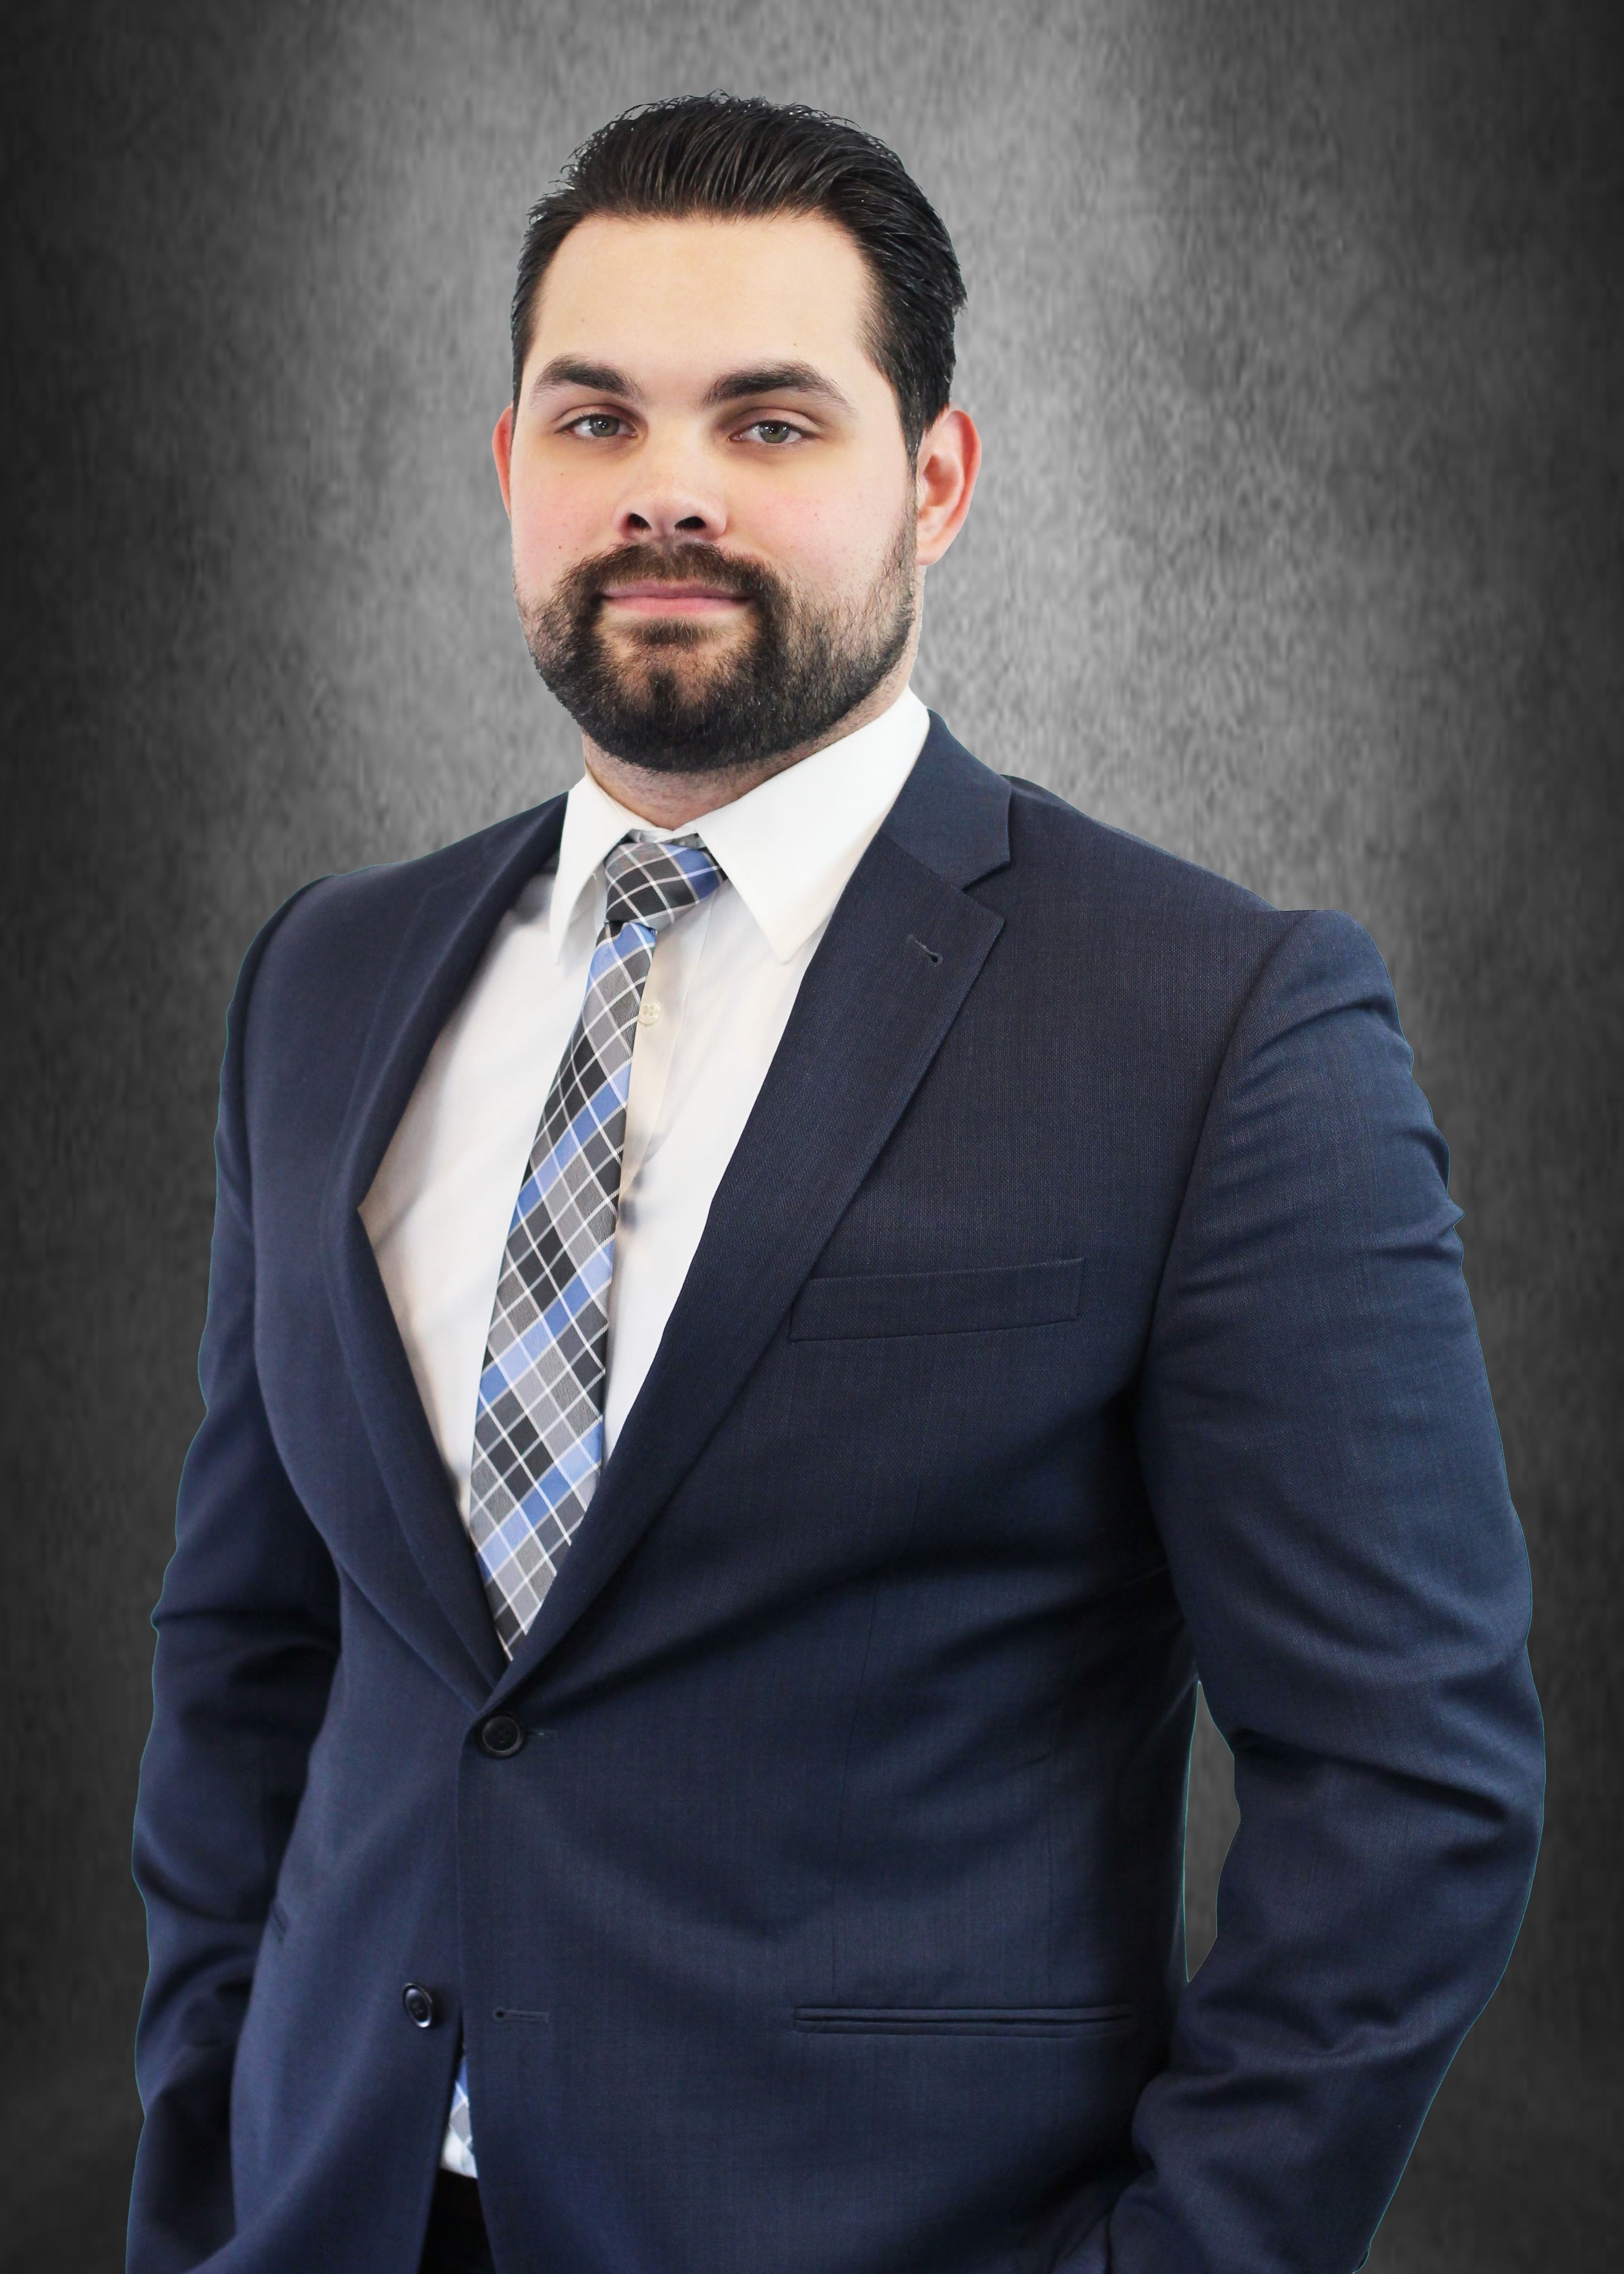 KYLE TRACY POLING  Your Financial Professional & Insurance Agent